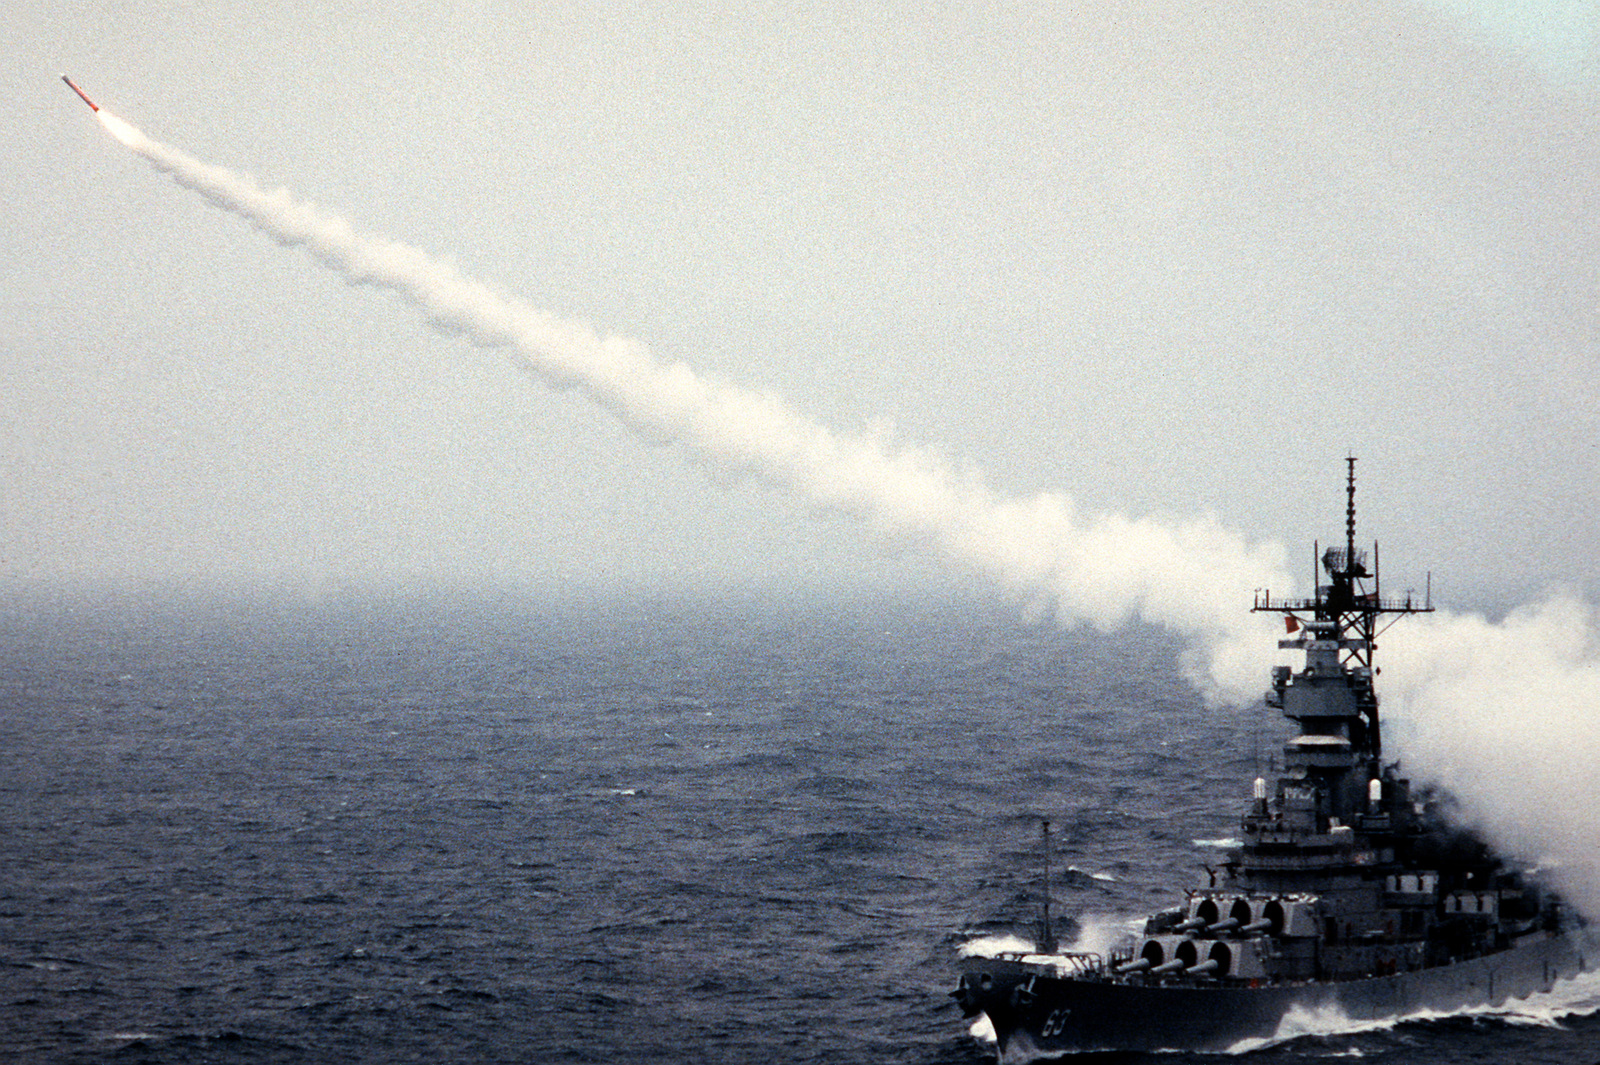 Missile firing from Navy ship